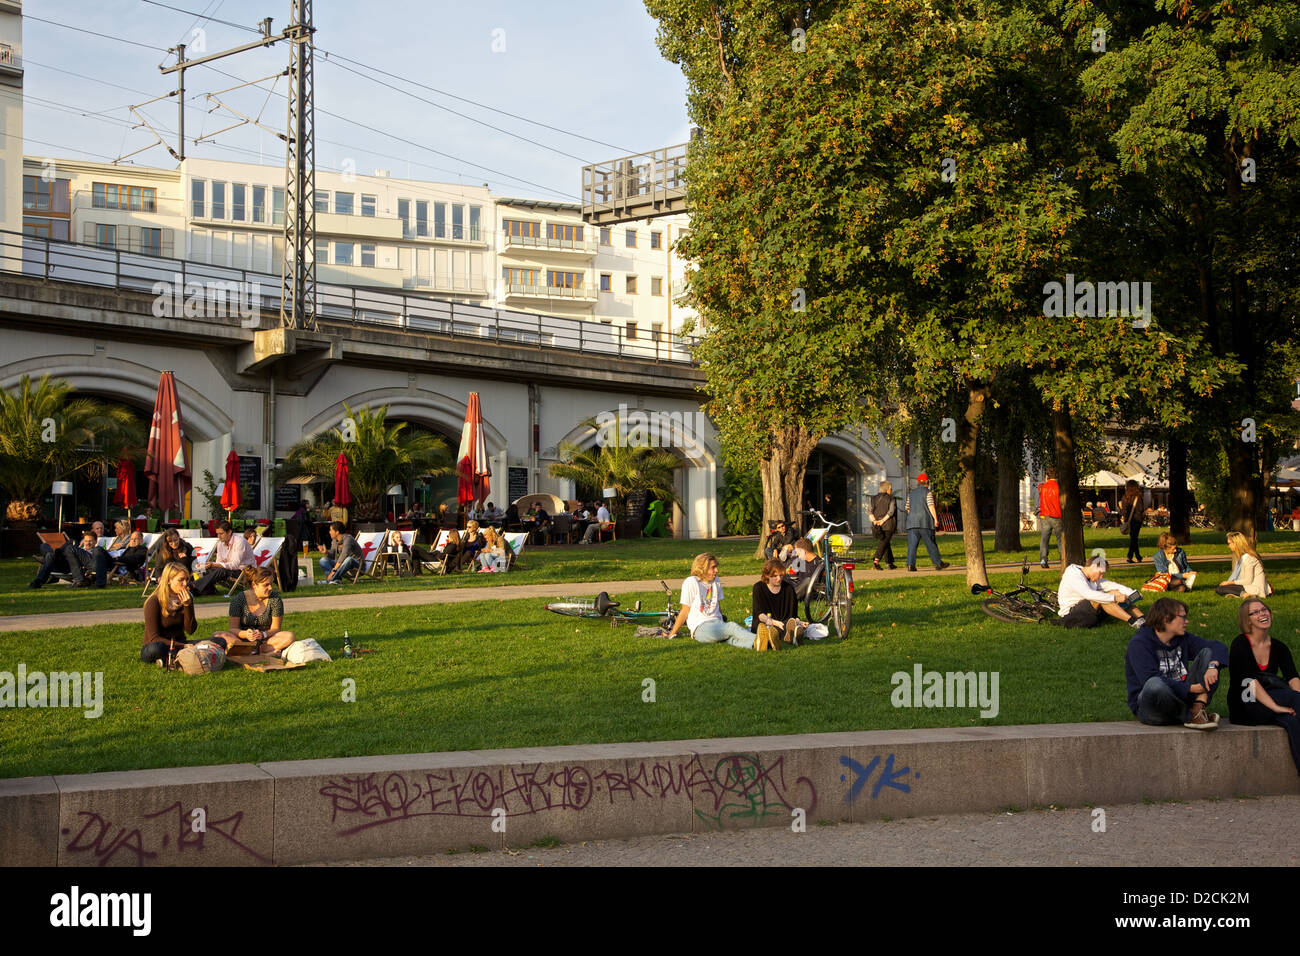 Young people relaxing in James Simon Park, Berlin Gremany Stock Photo